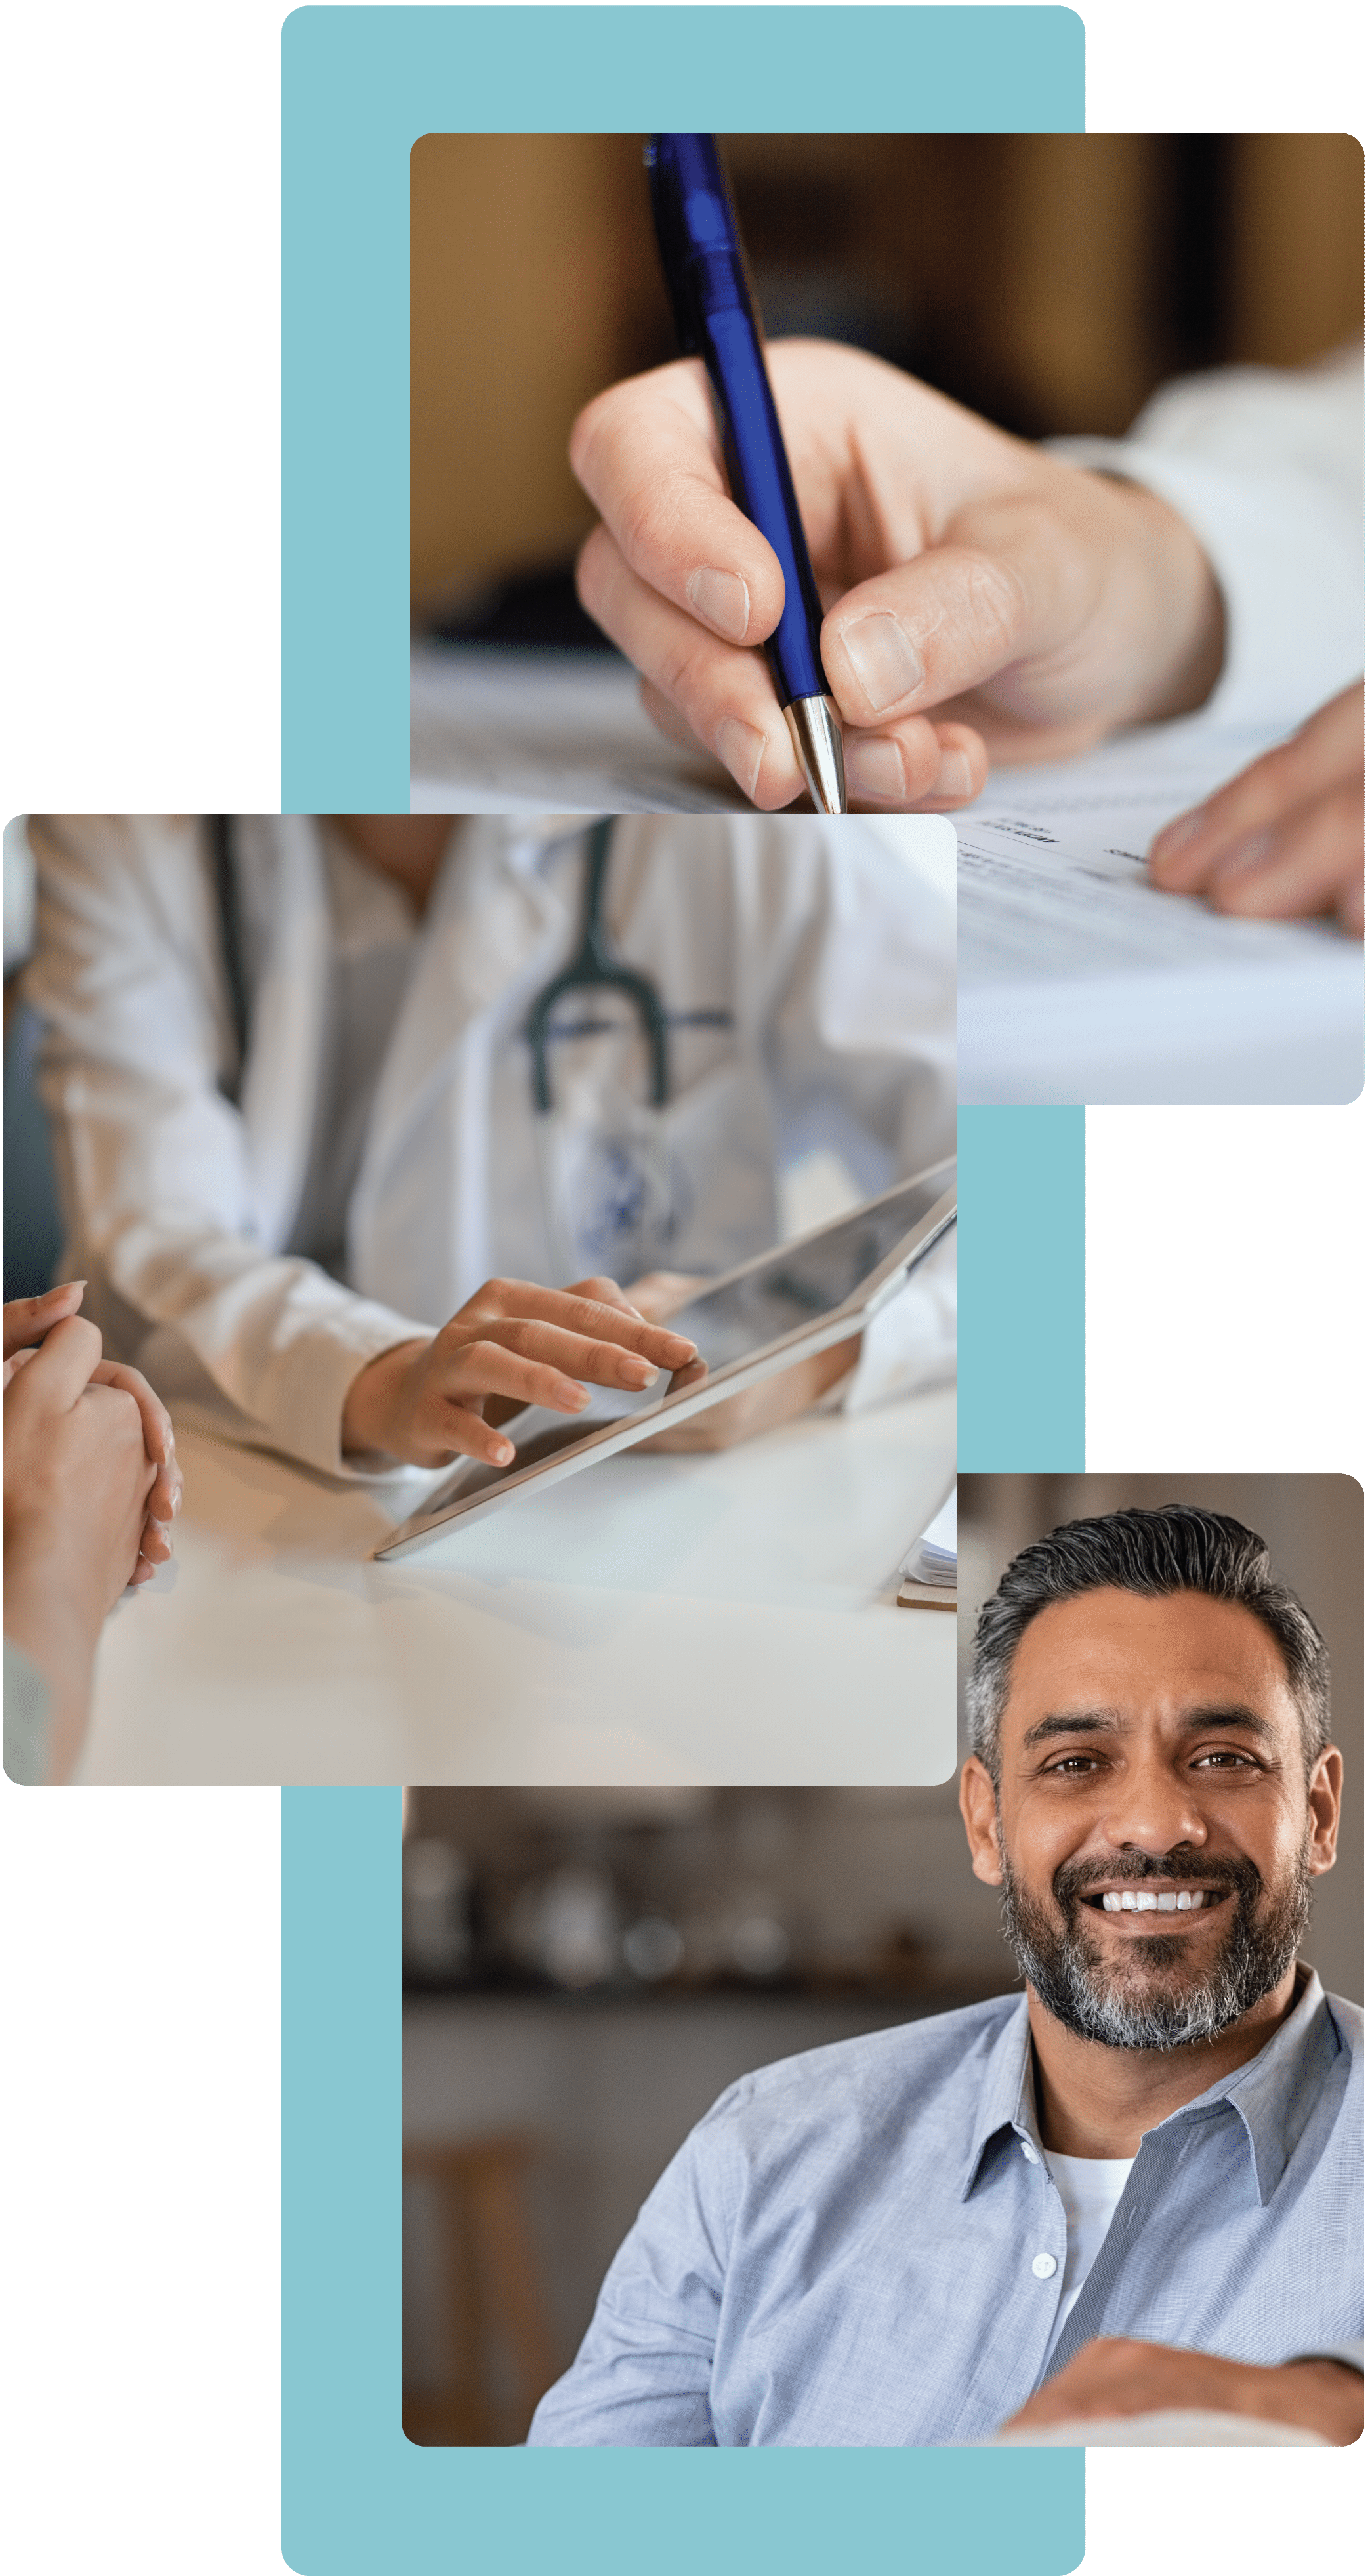 three pictures of a man smiling, dr during consultation, and hand signing paper with a pen